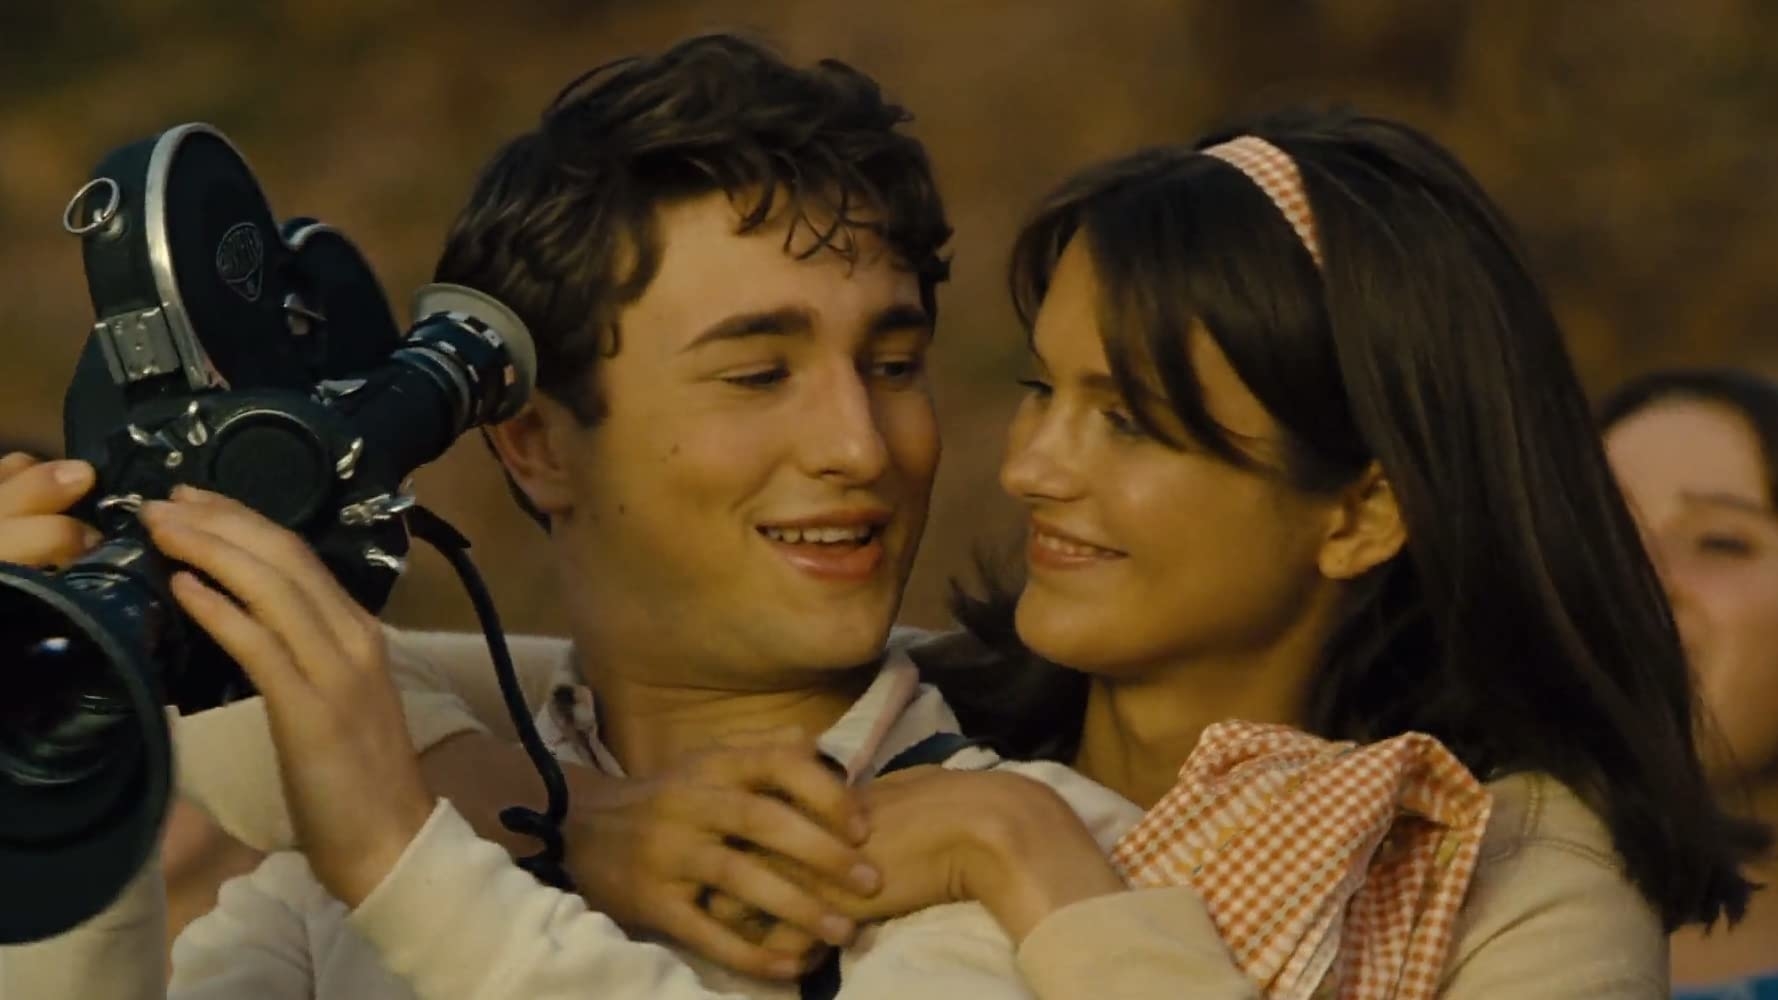 Two characters share a joyful embrace while holding a film camera, suggesting a scene from a movie or series